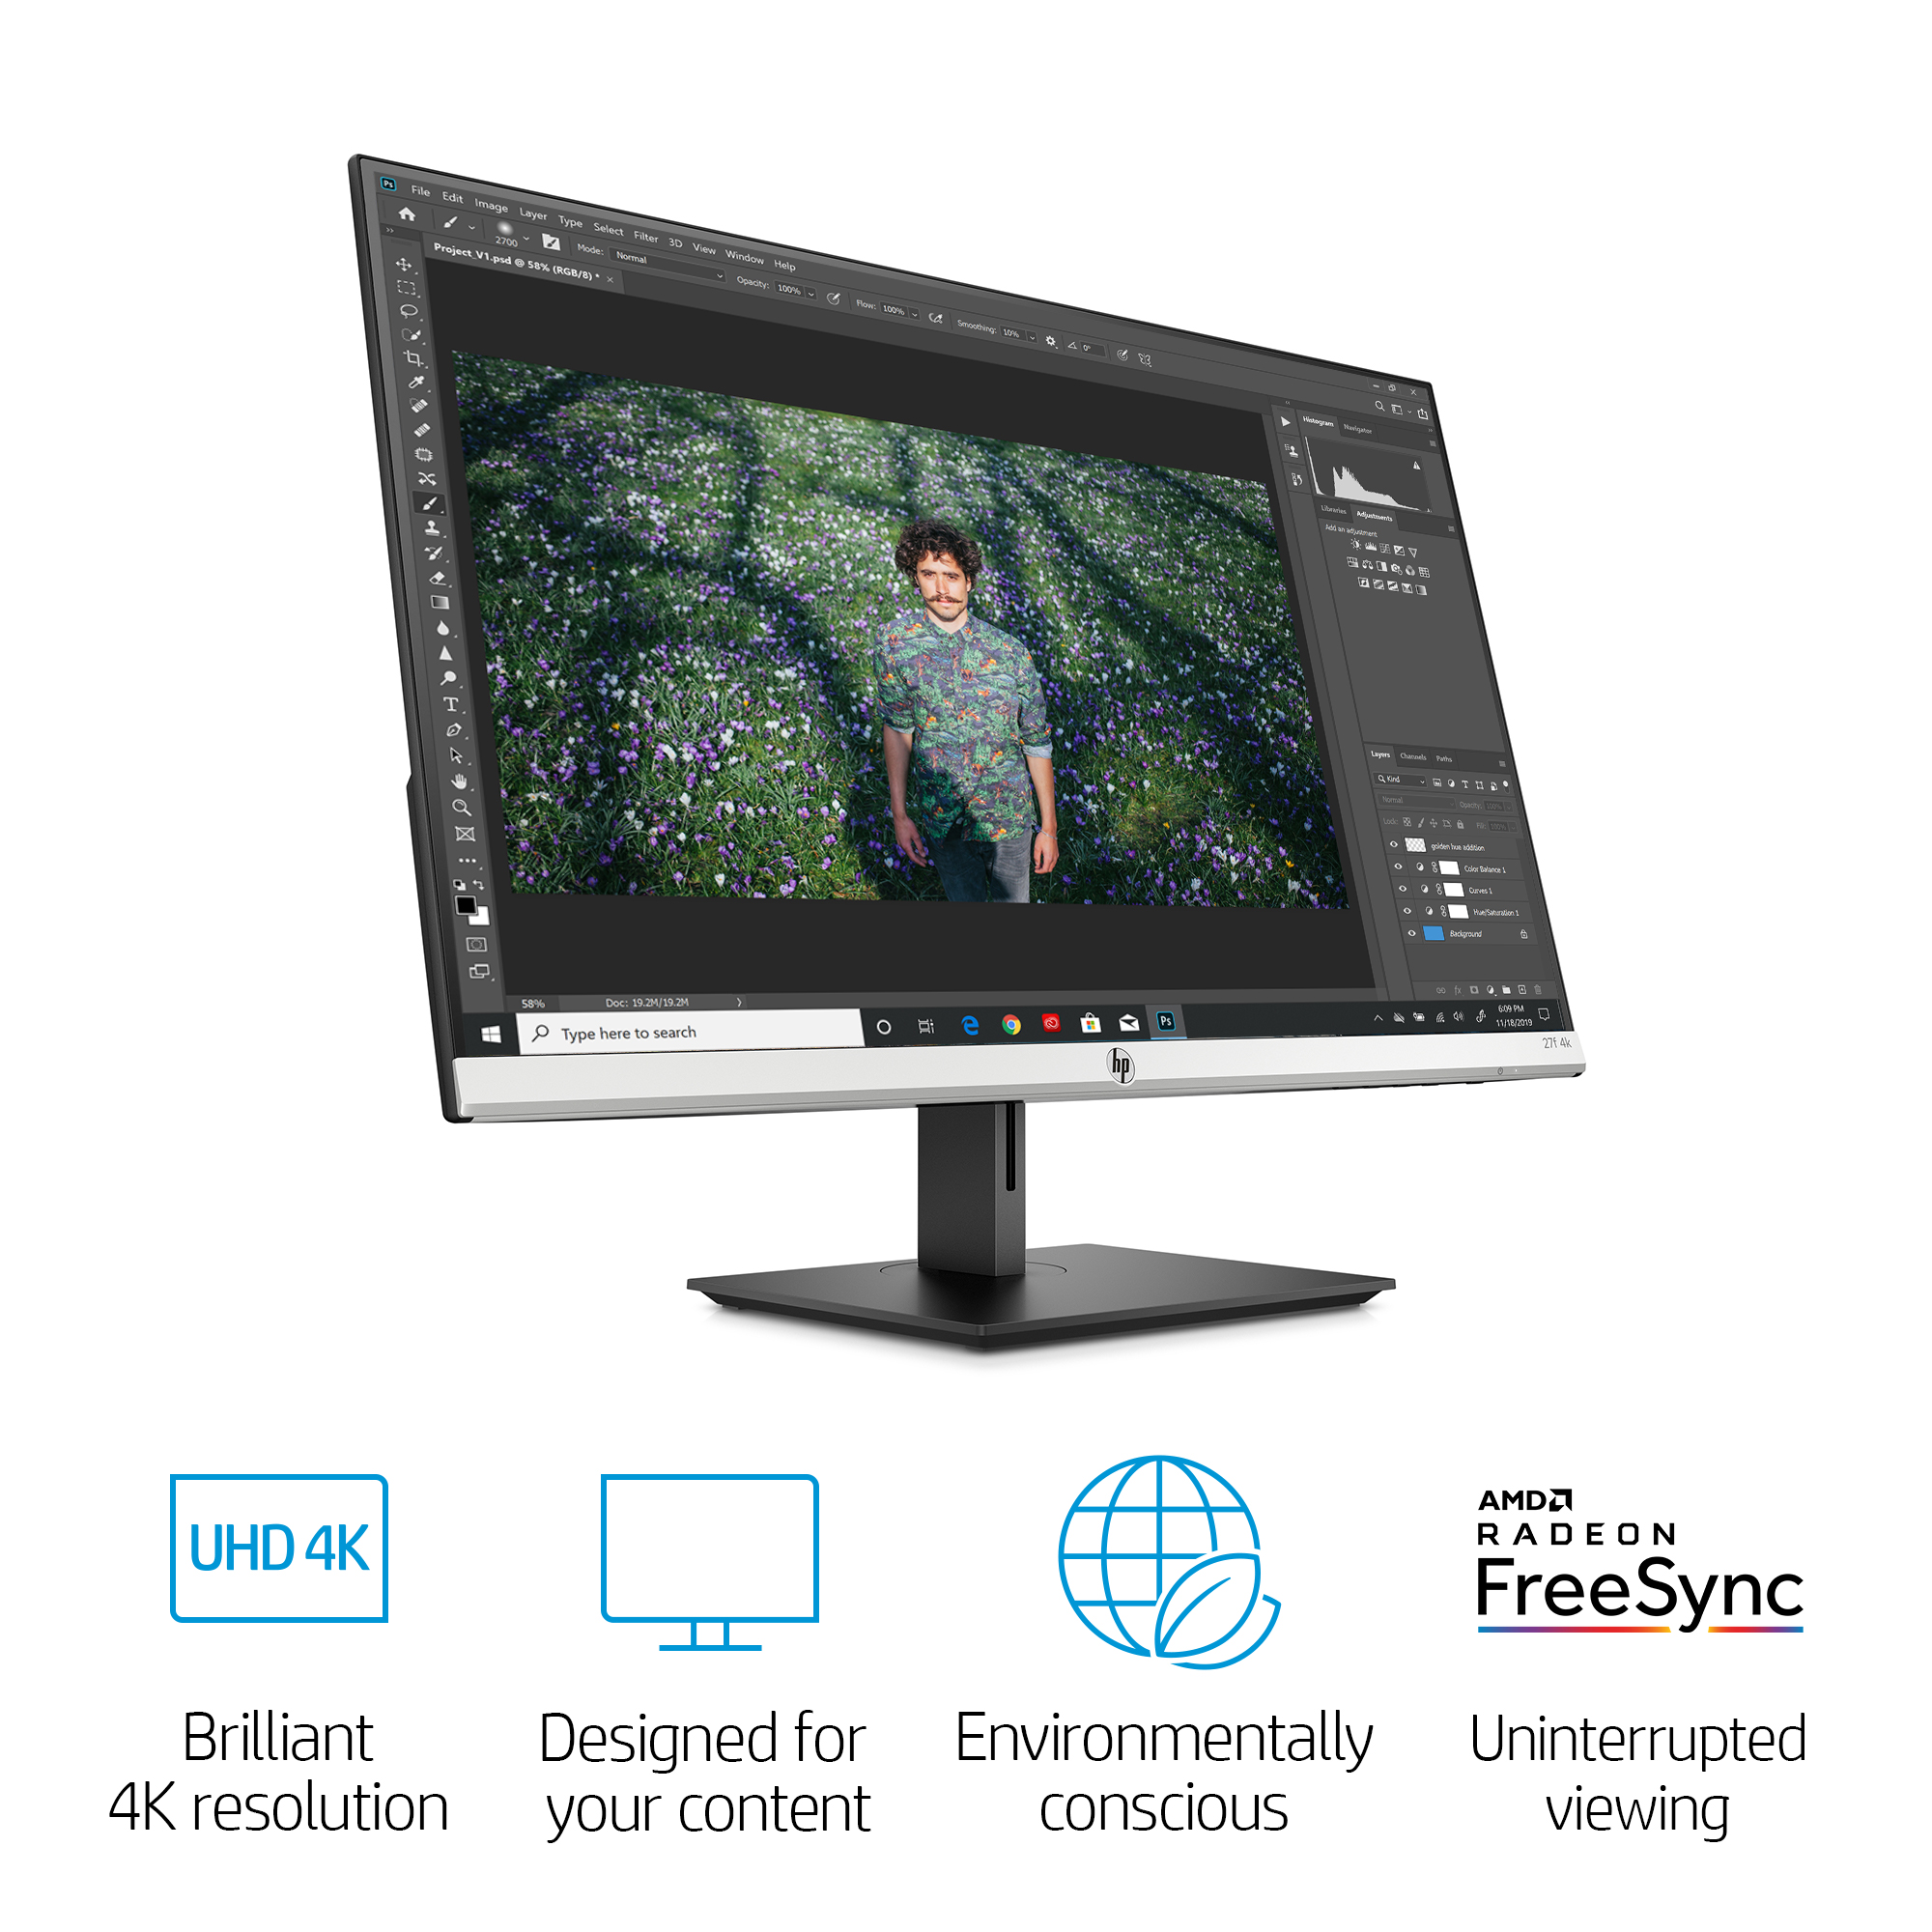 HP 27f 27” UHD 3840 x 2160 4K IPS Free Sync Monitor, 5ms Response Time,  60Hz Refresh Rate, 2 HDMI, DisplayPort, 10000000:1 Contrast Ratio, 178°